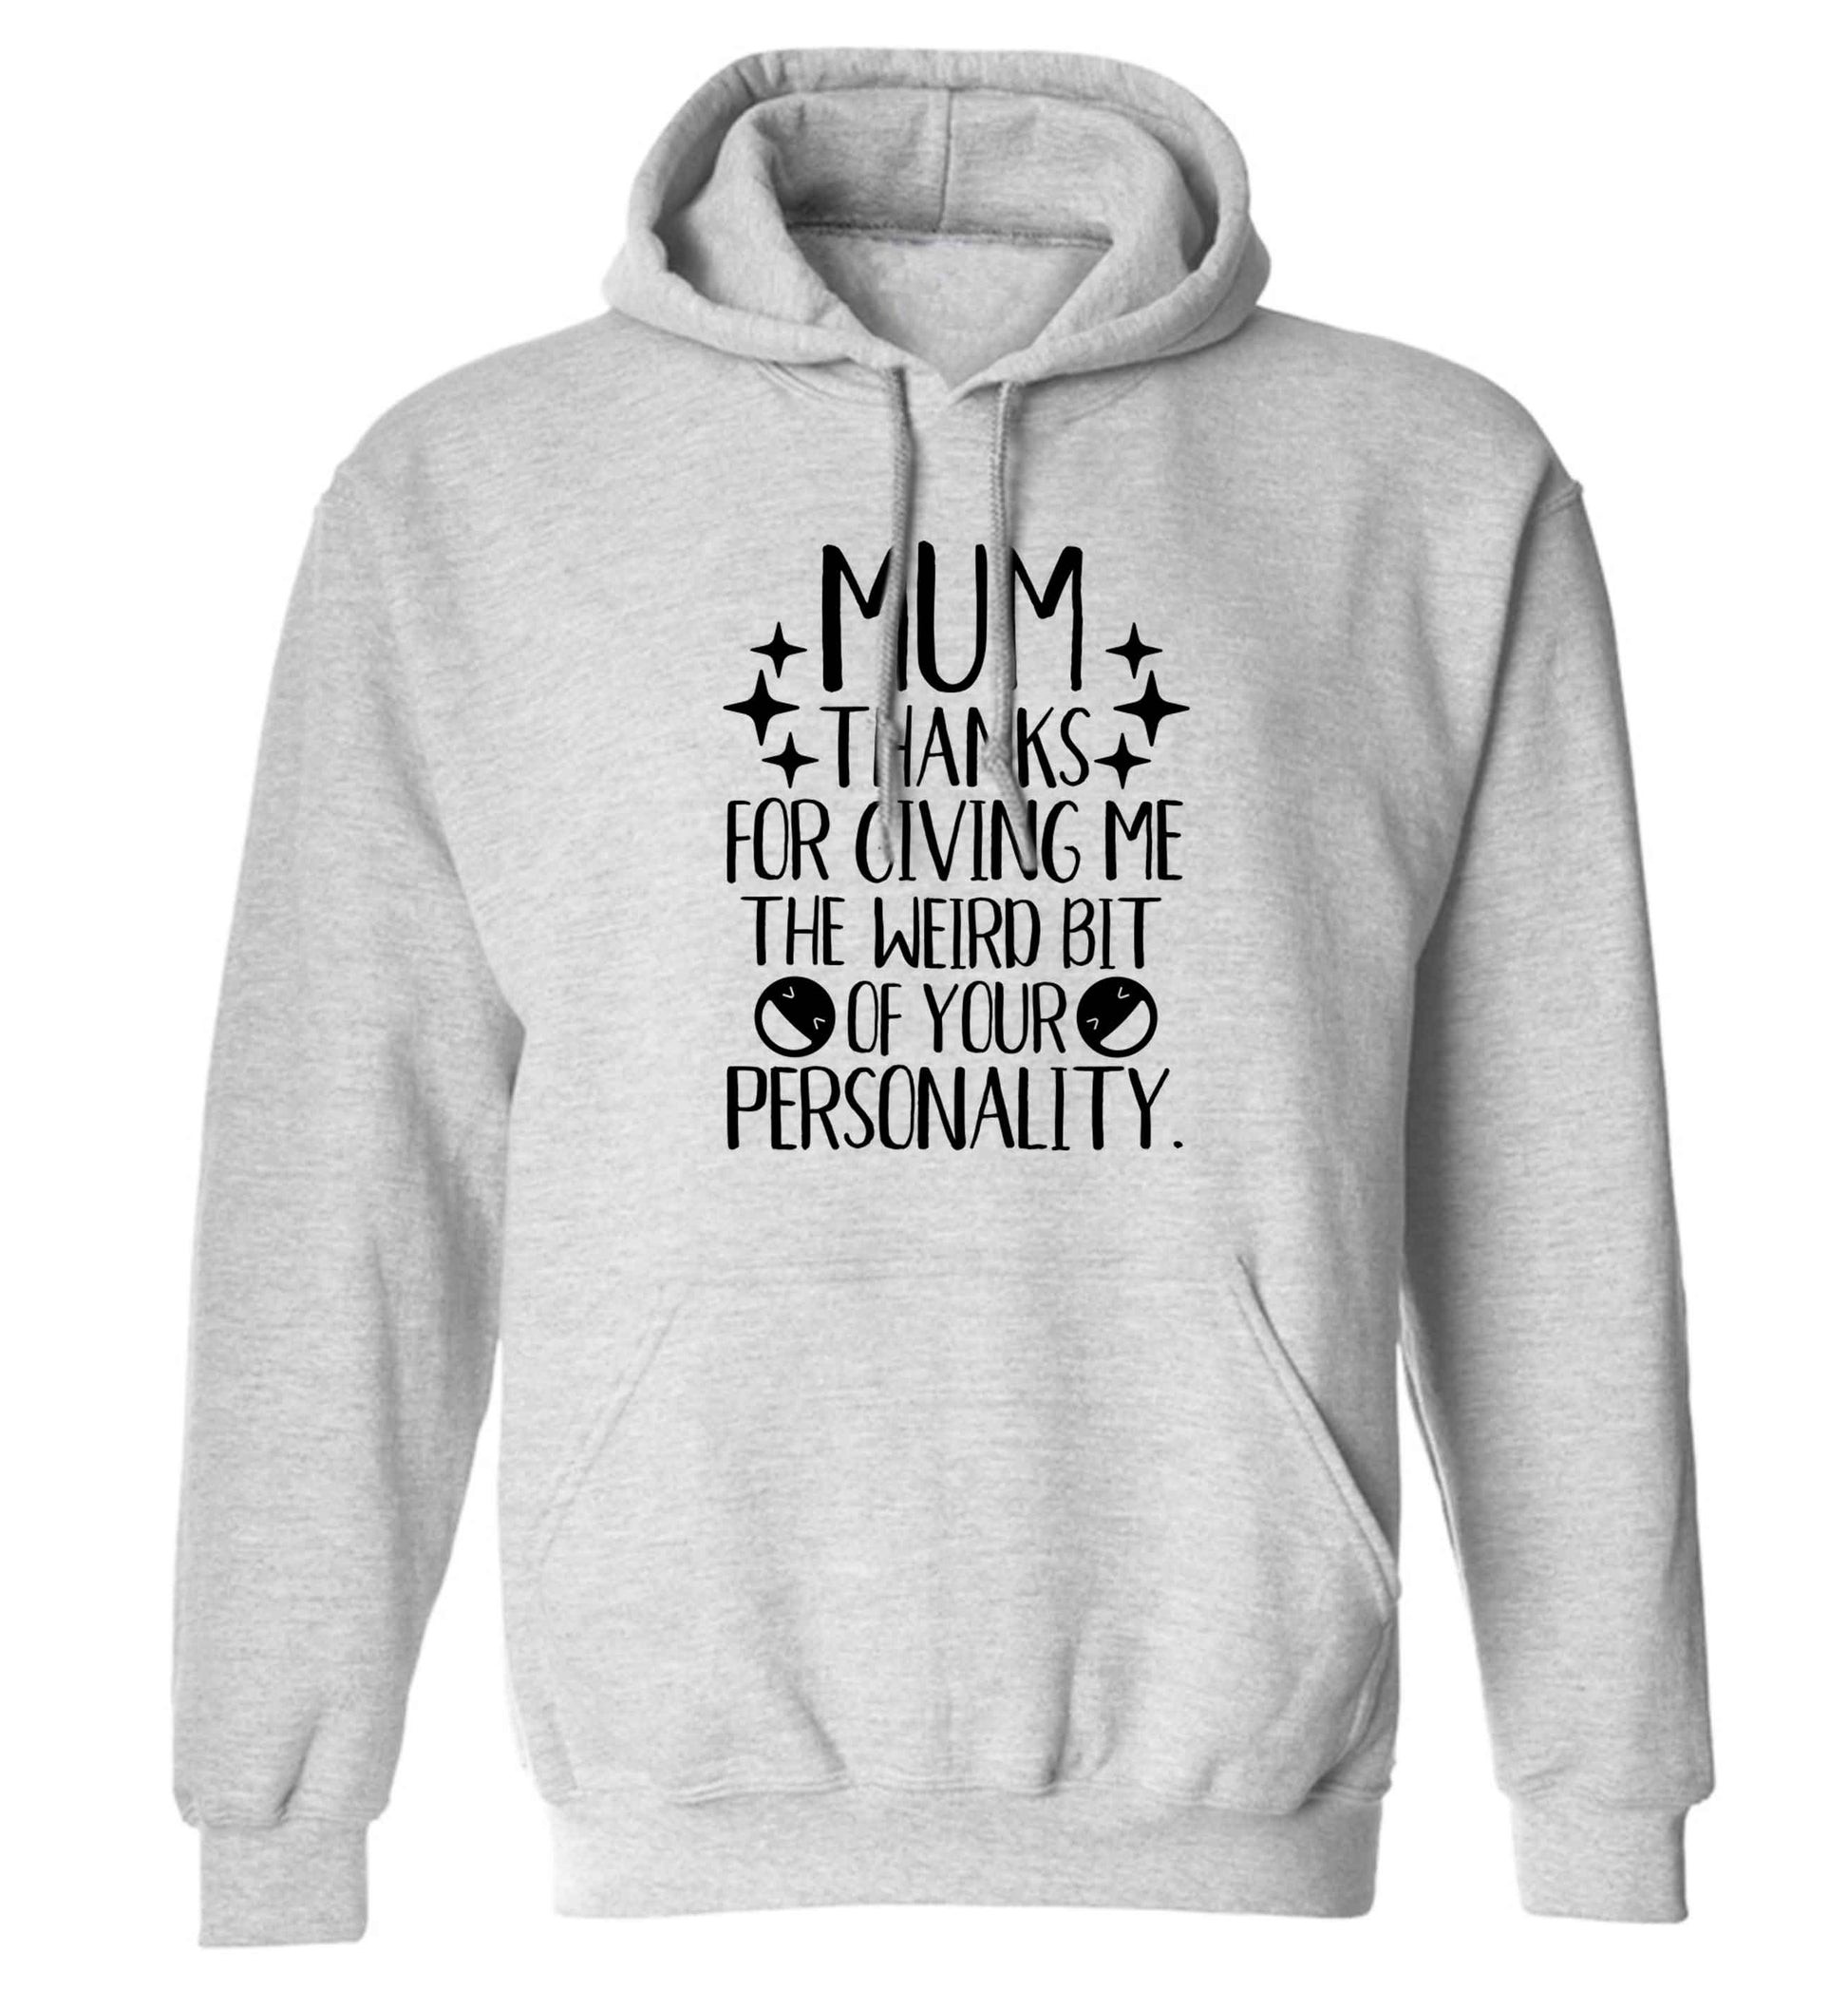 Mum thanks for giving me the weird bit of your personality adults unisex grey hoodie 2XL